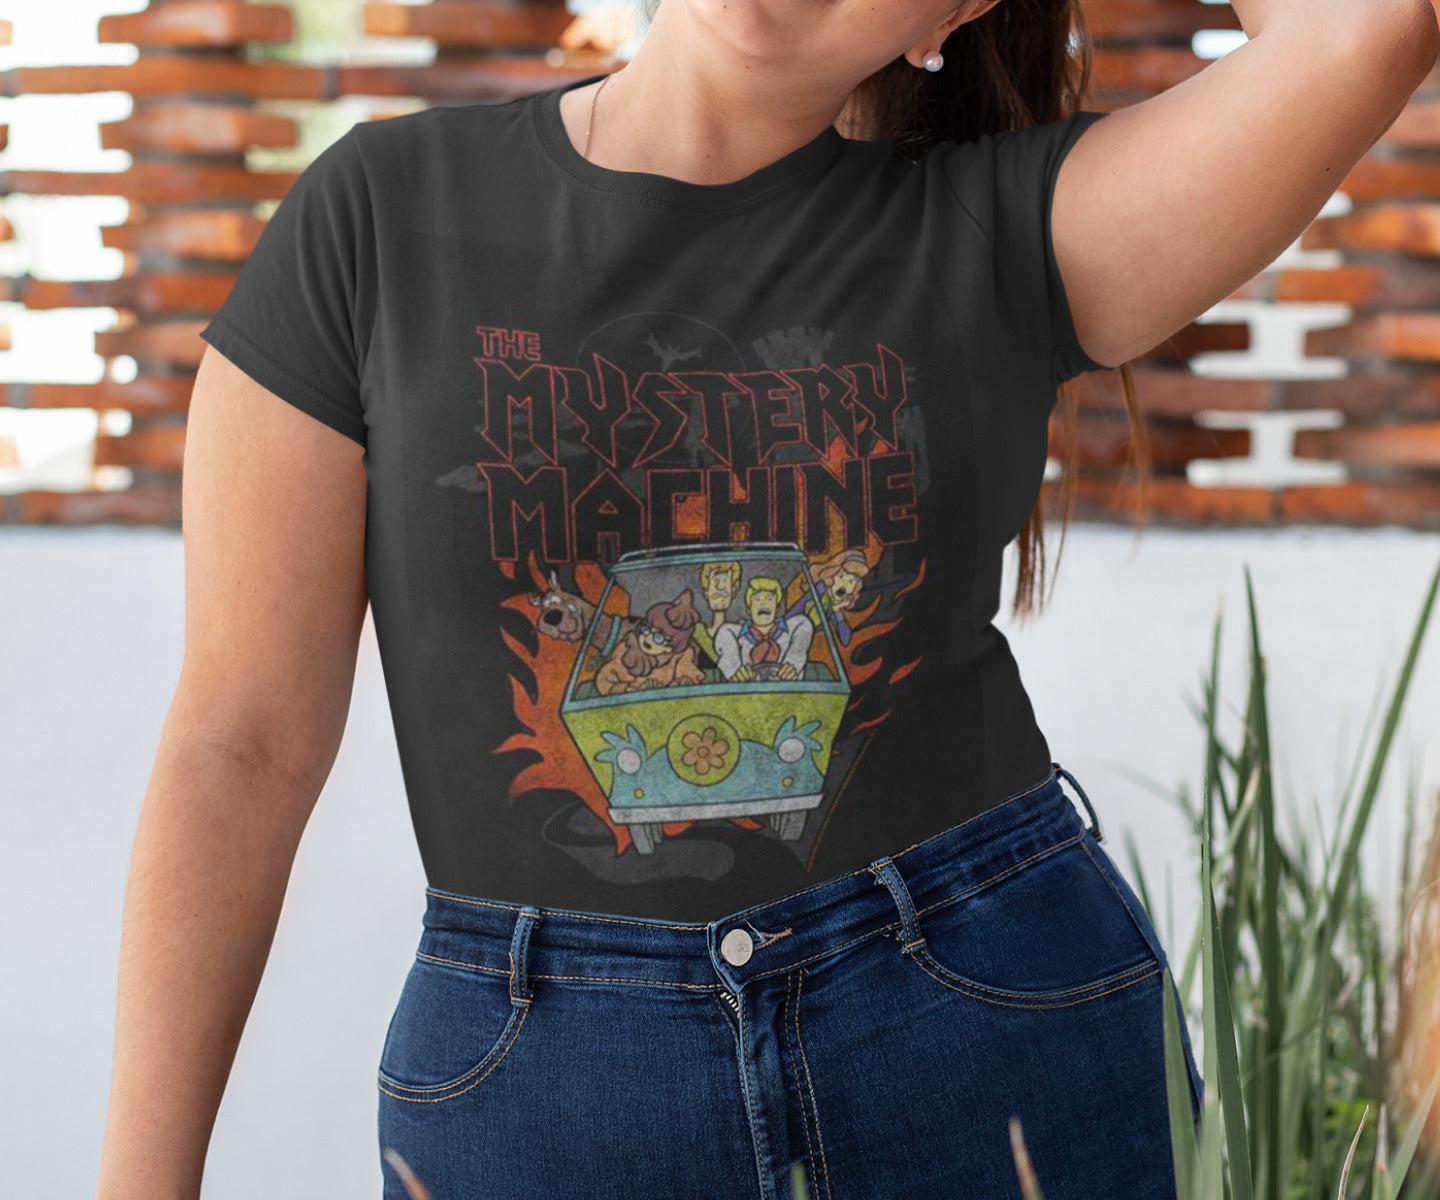 RUH-ROH! GRAPHIC TEES